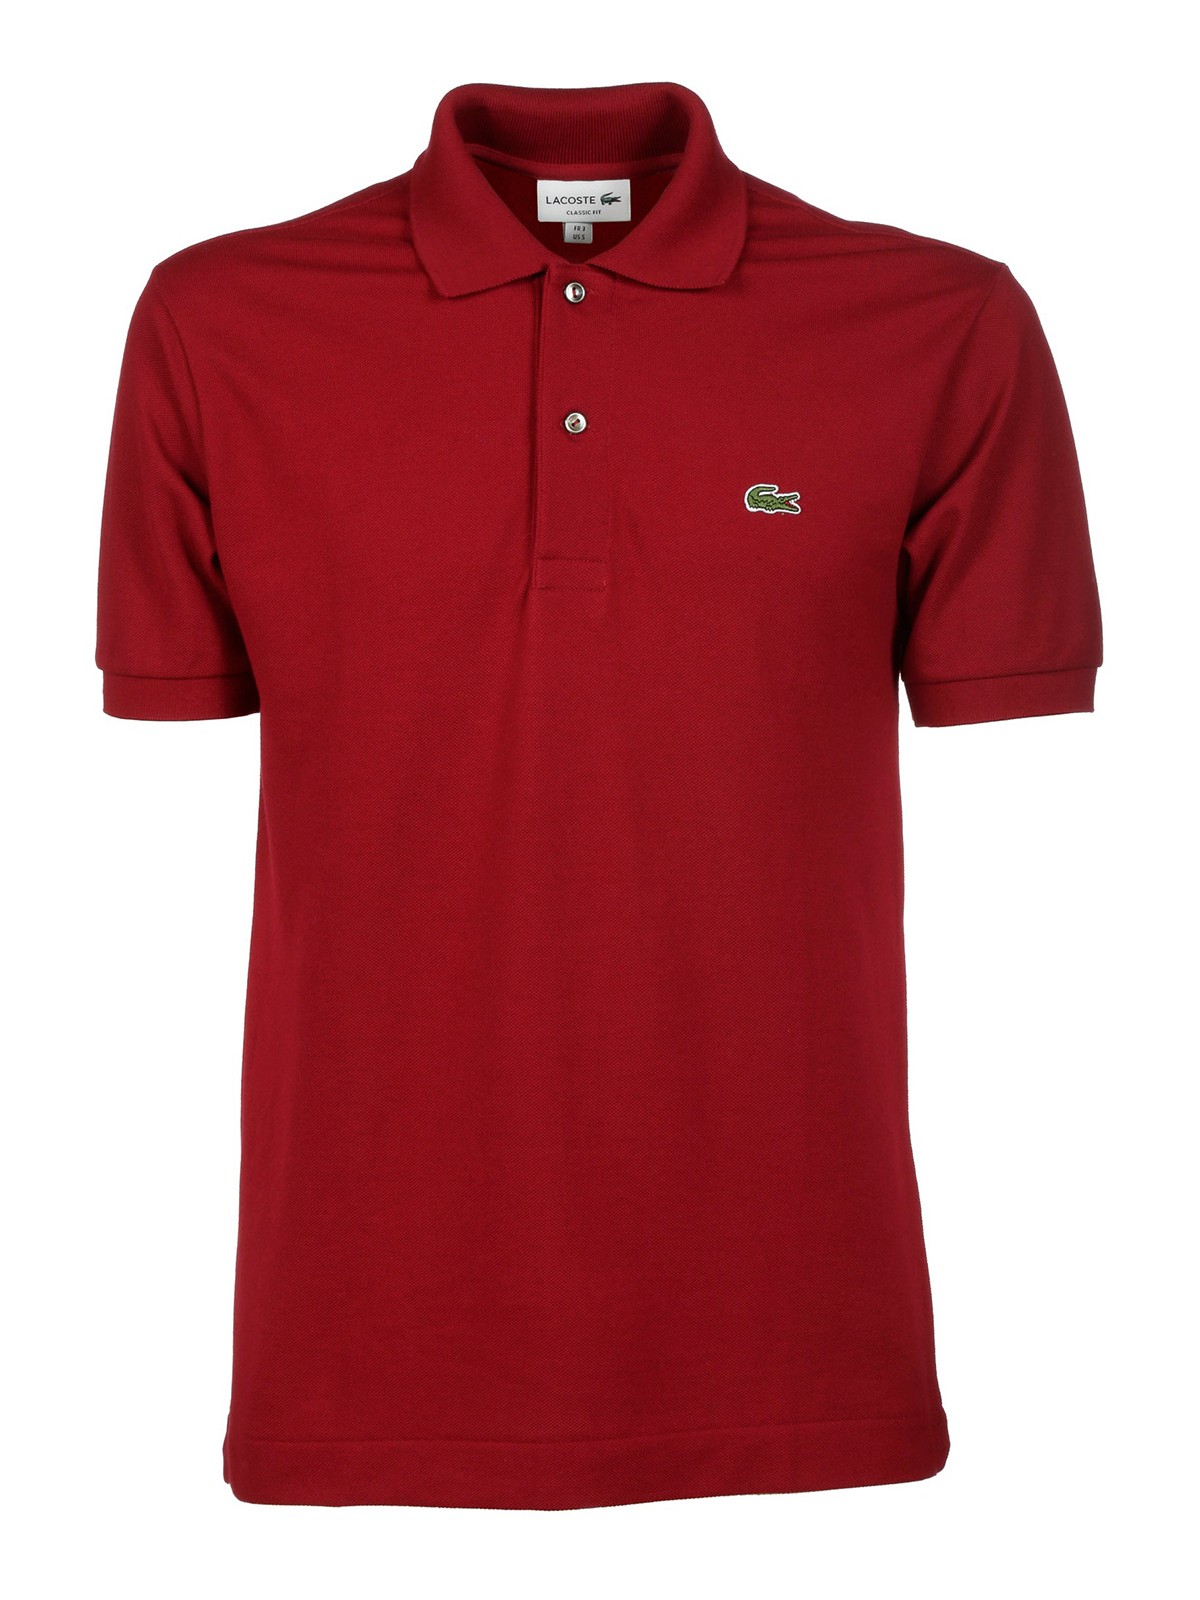 Polo shirts Lacoste - polo - | Shop online at THEBS [iKRIX]